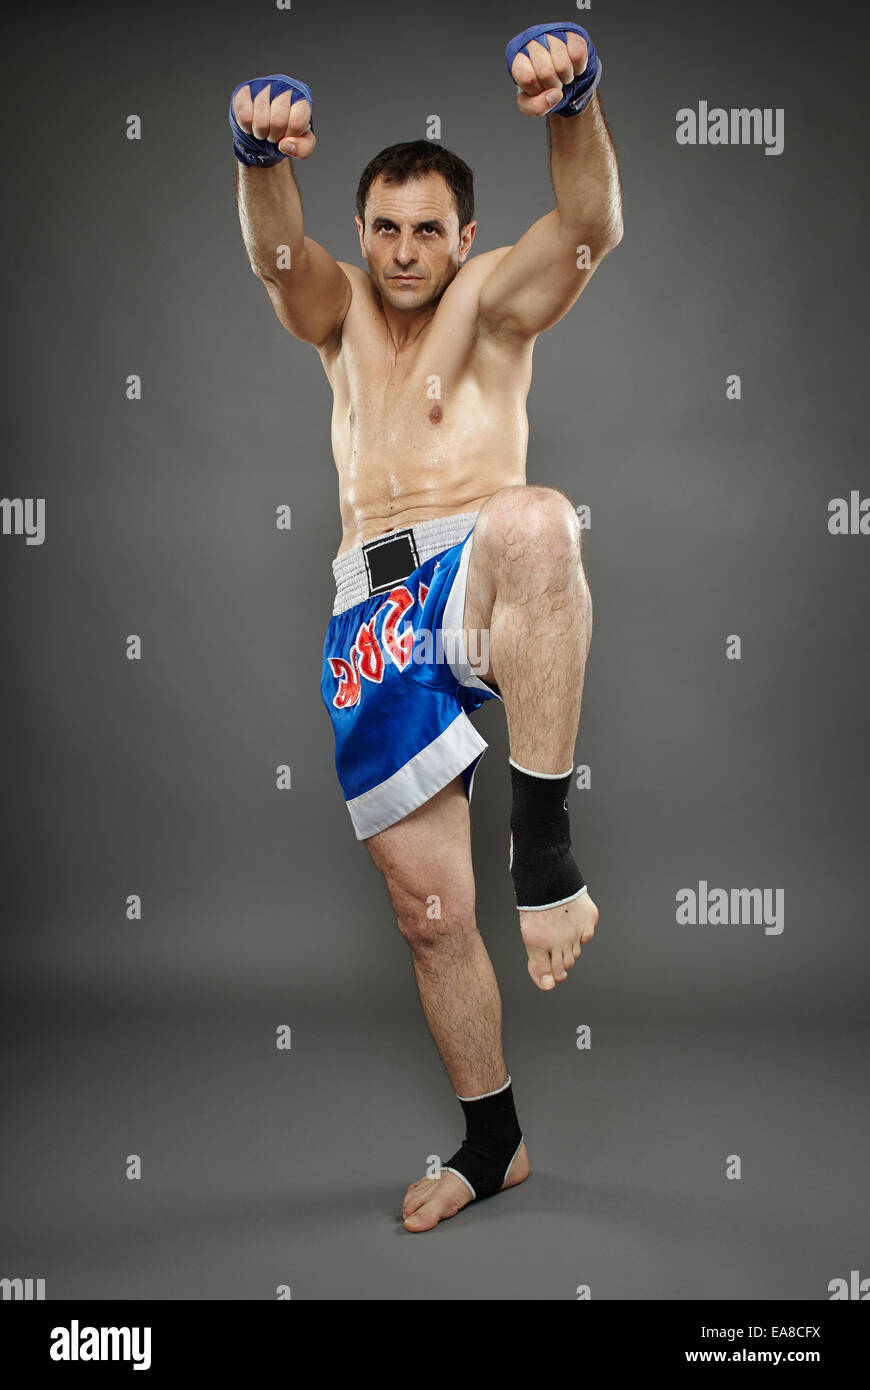 Kickbox or muay thai fighter in guard stance Stock Photo - Alamy